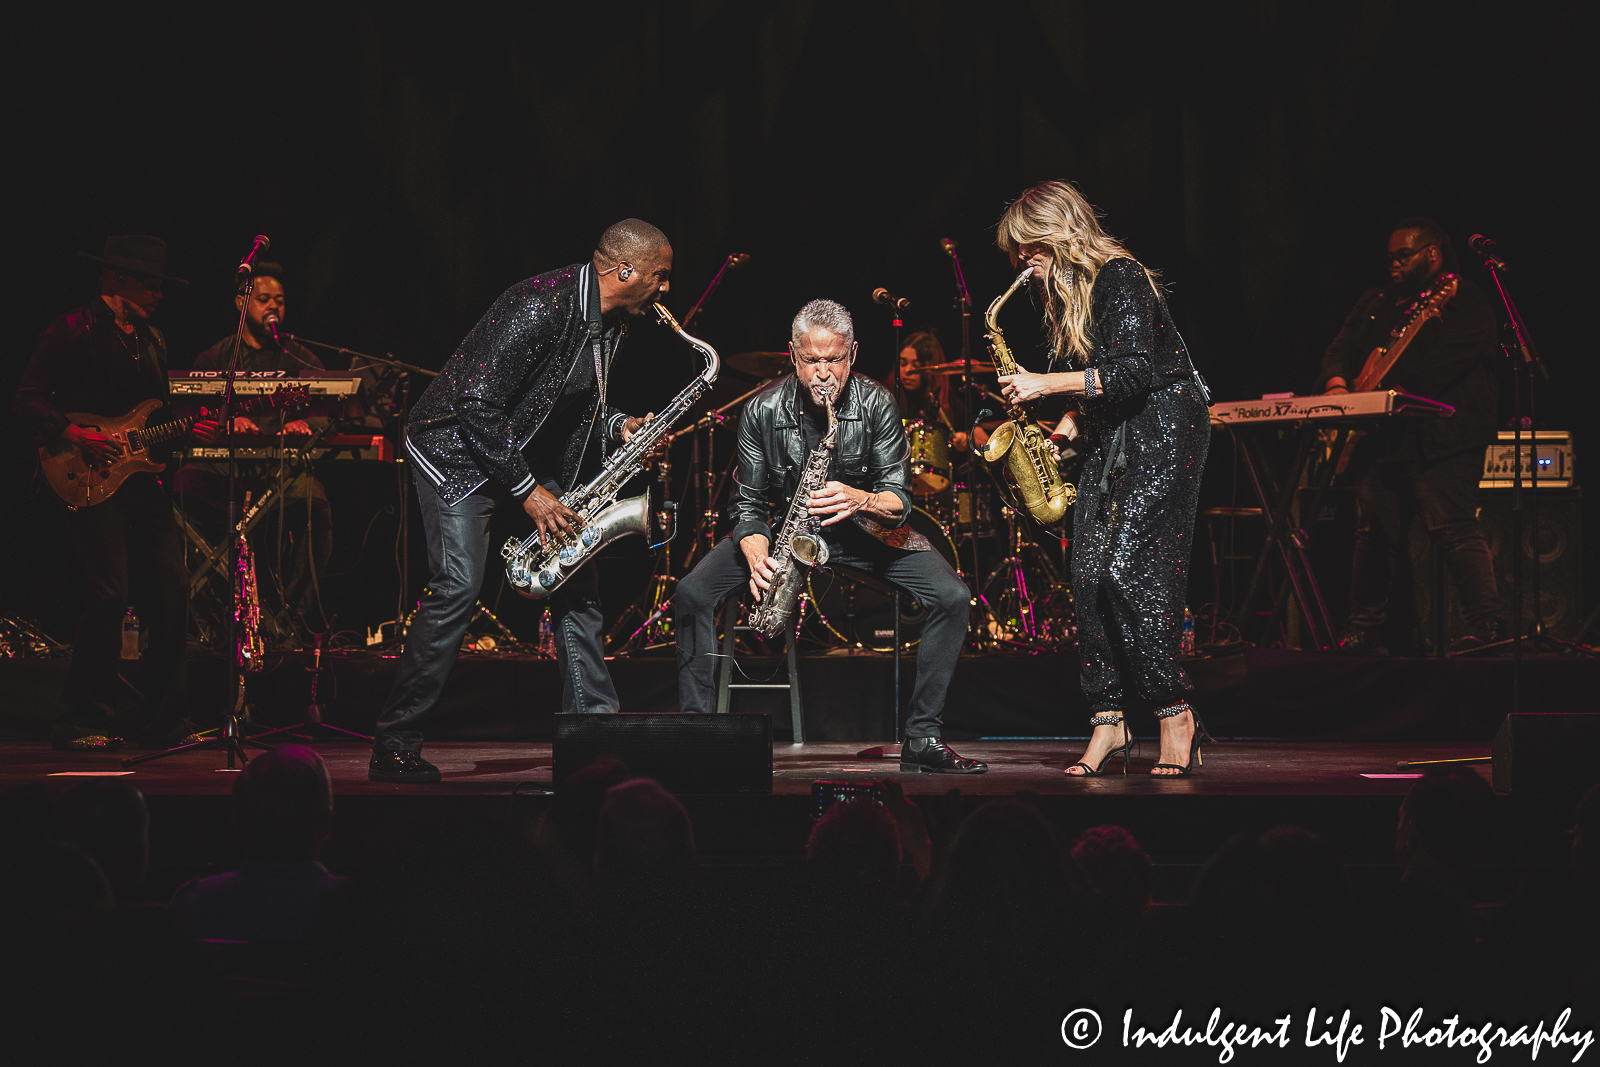 Dave Koz & Friends—Candy Dulfer and Eric Darius—live in concert at Kauffman Center for the Performing Arts in downtown Kansas City, MO on July 15, 2023.